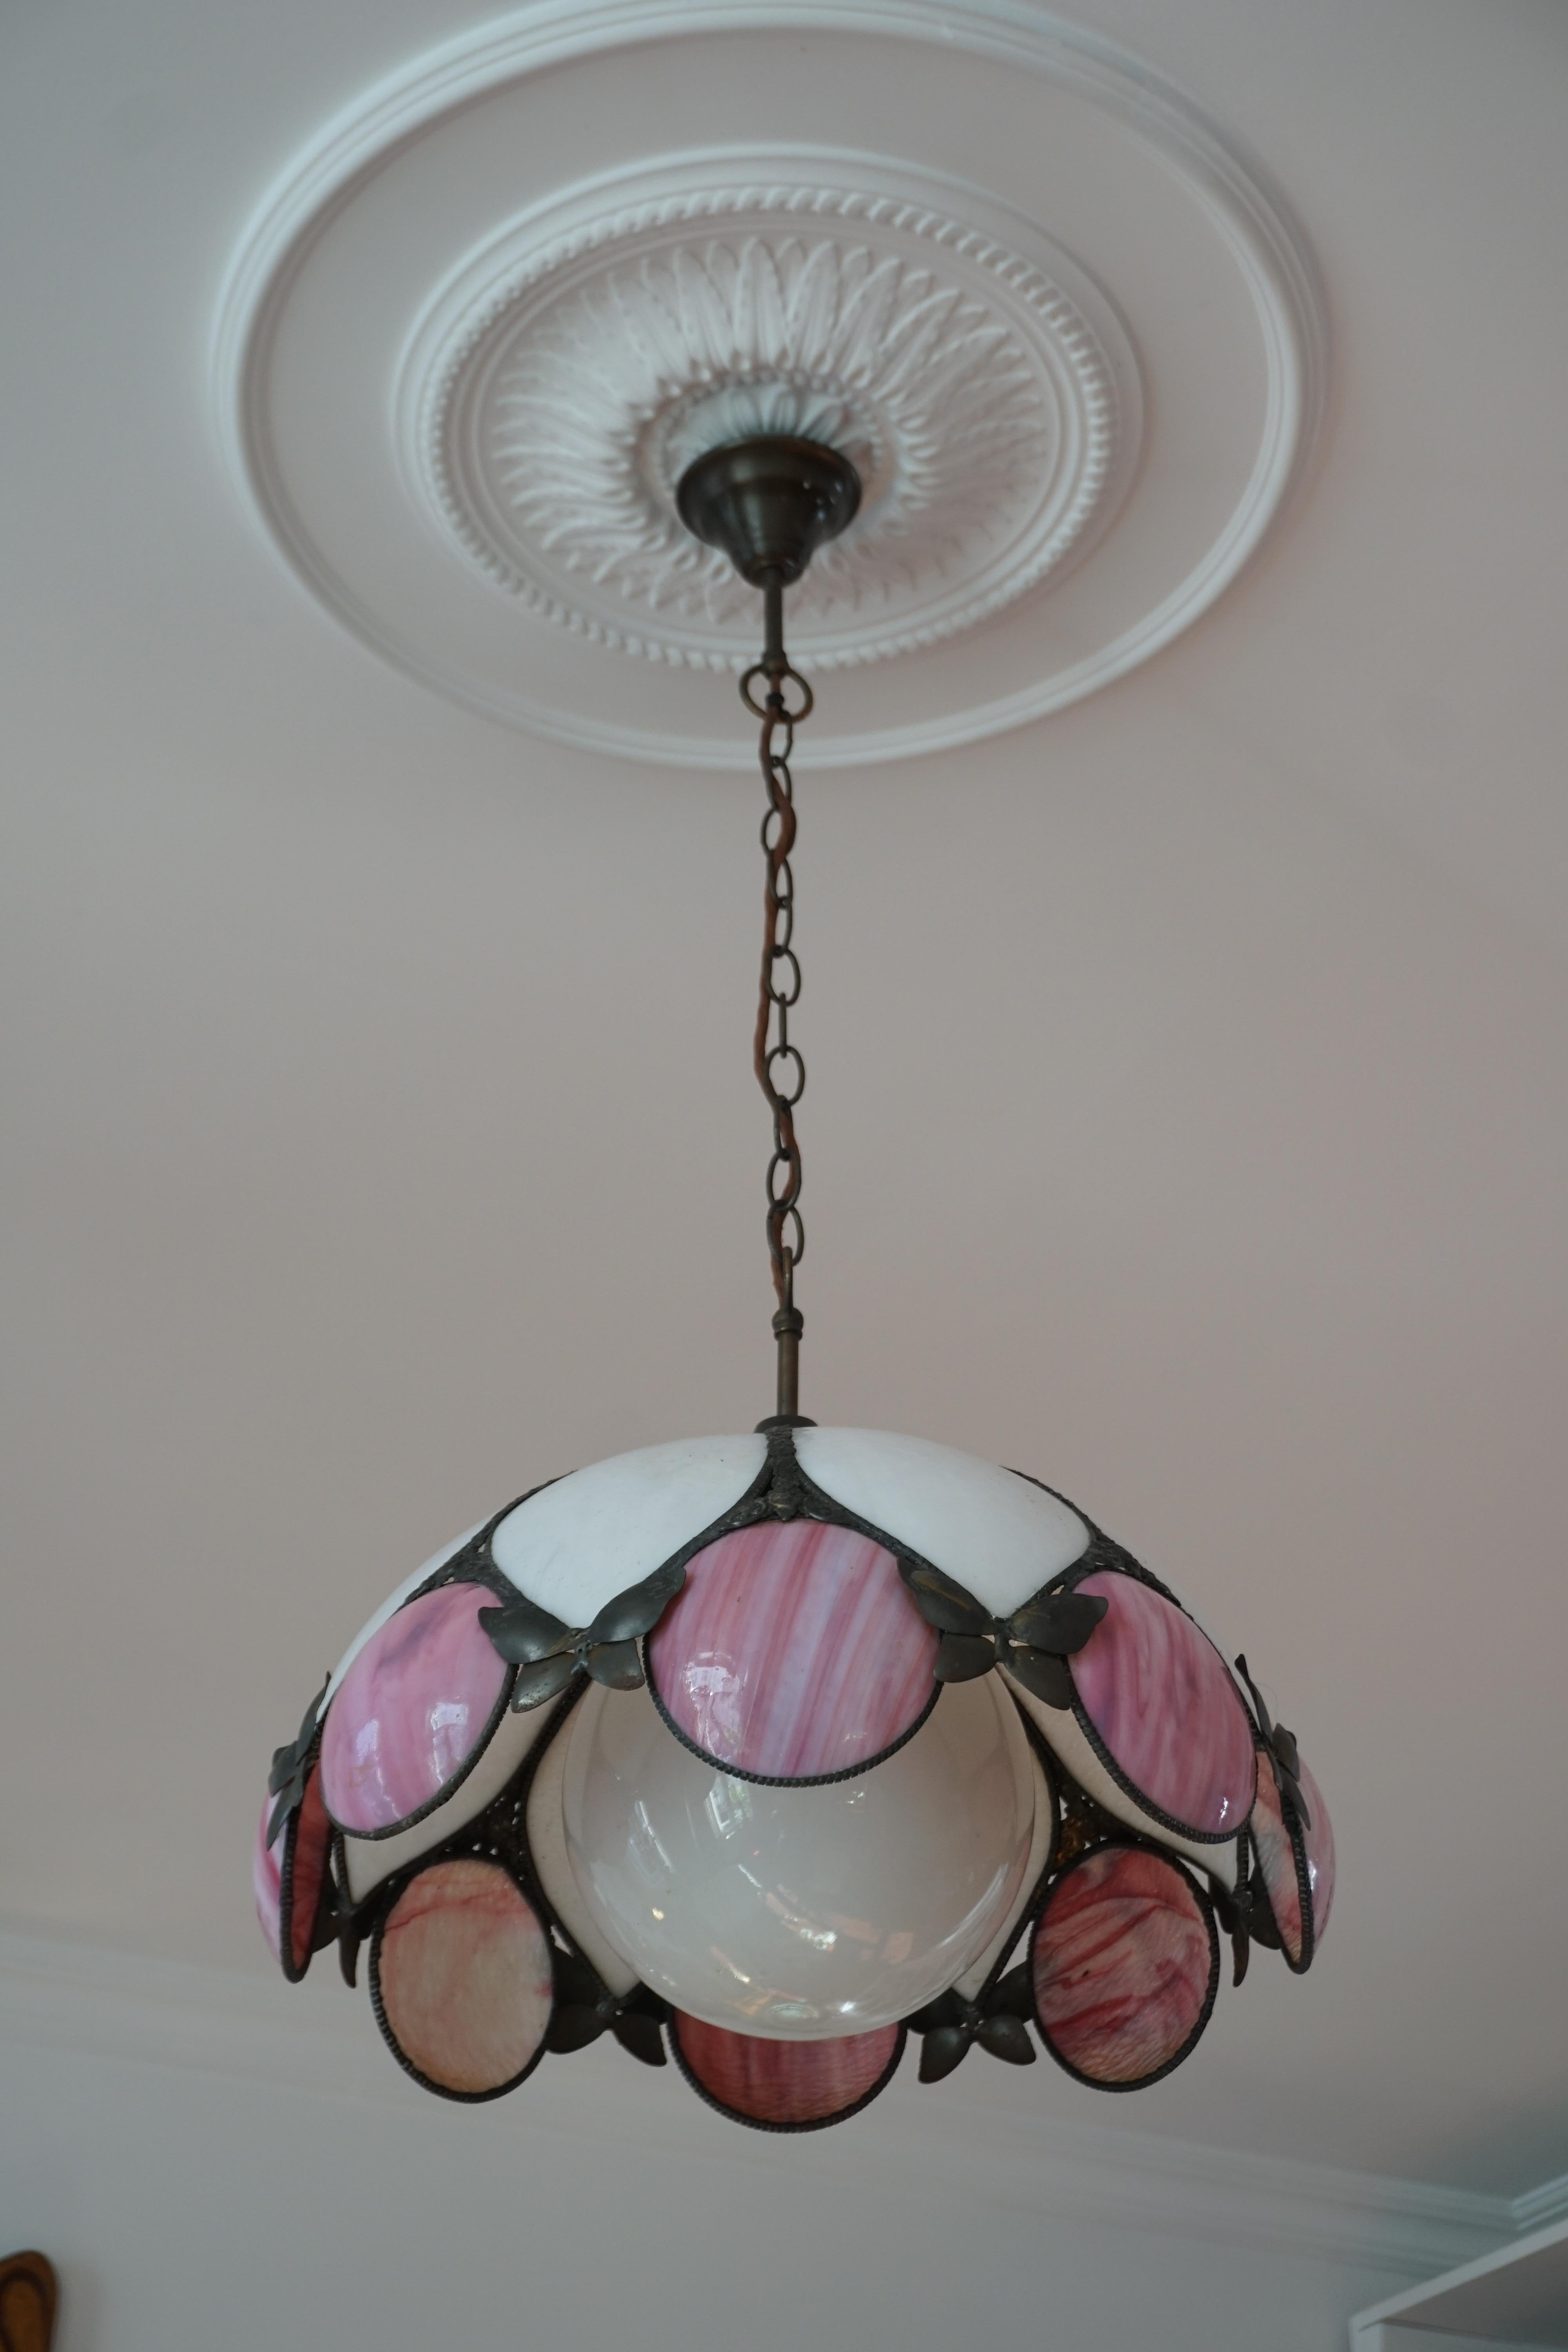 A circa 1950's Italian pink & white leaded glass pendant light fixture.

The lamp needs 1 x E27 / E26 Edison screw fit bulb, is wired. 

Dimensions:
diameter 46 cm. 
height fixture 26 cm.
Total height 80 cm.

Good original vintage